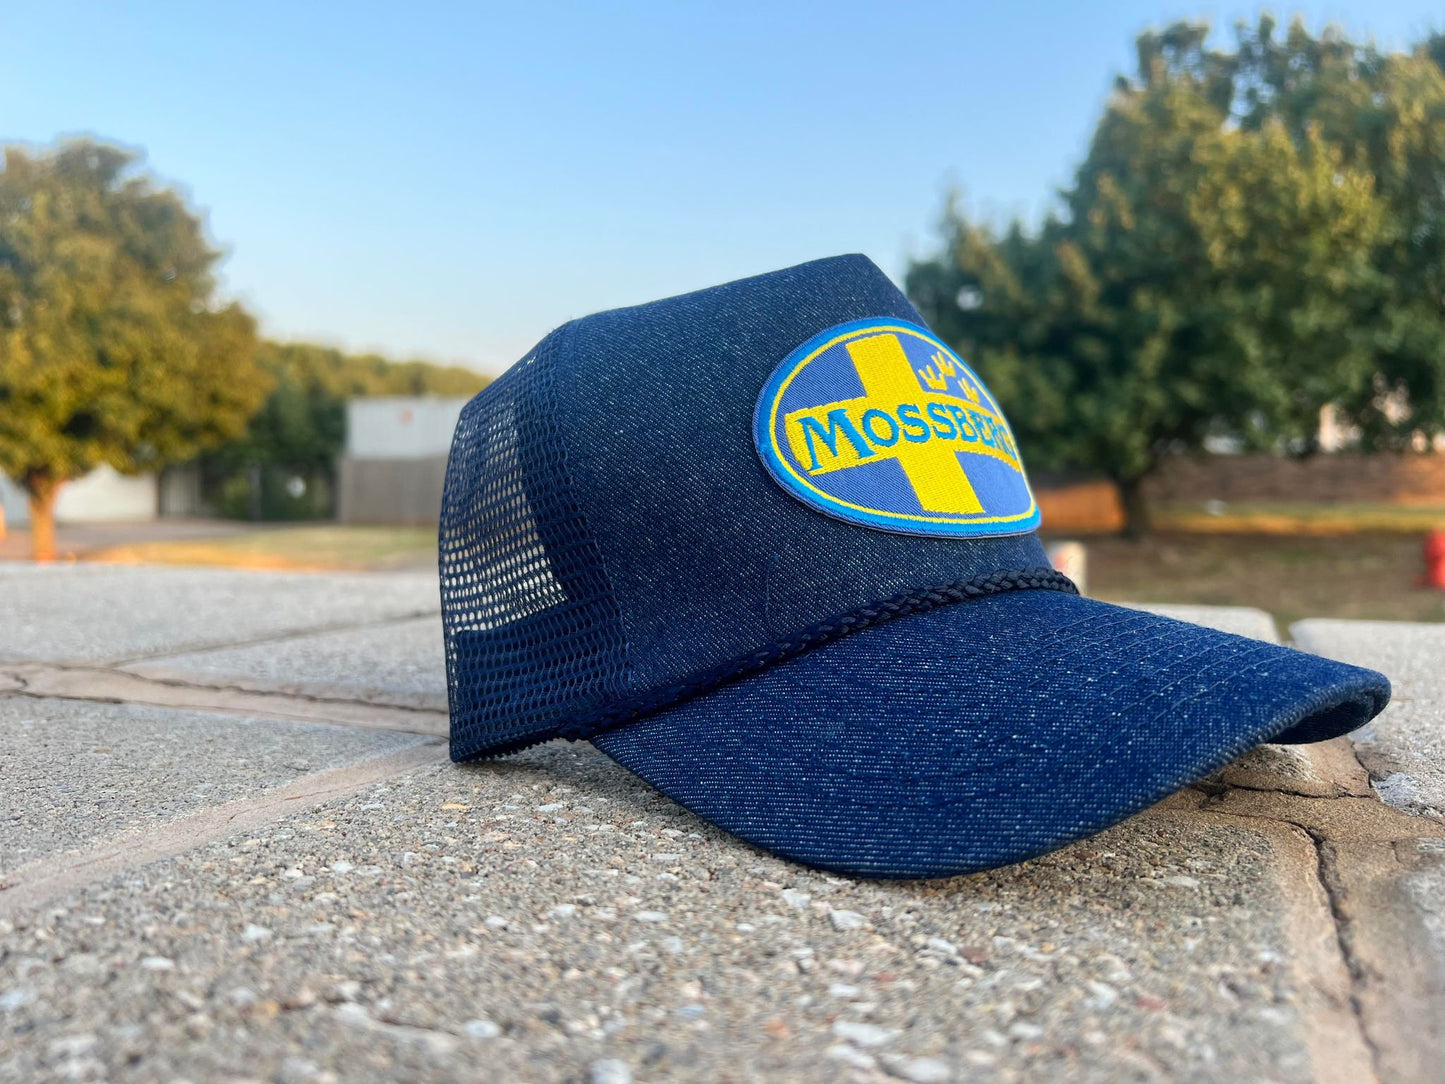 Vintage MOSSBERG guns Rope Snapback Trucker Mesh Hat with Patch - Apparel for Men and Women